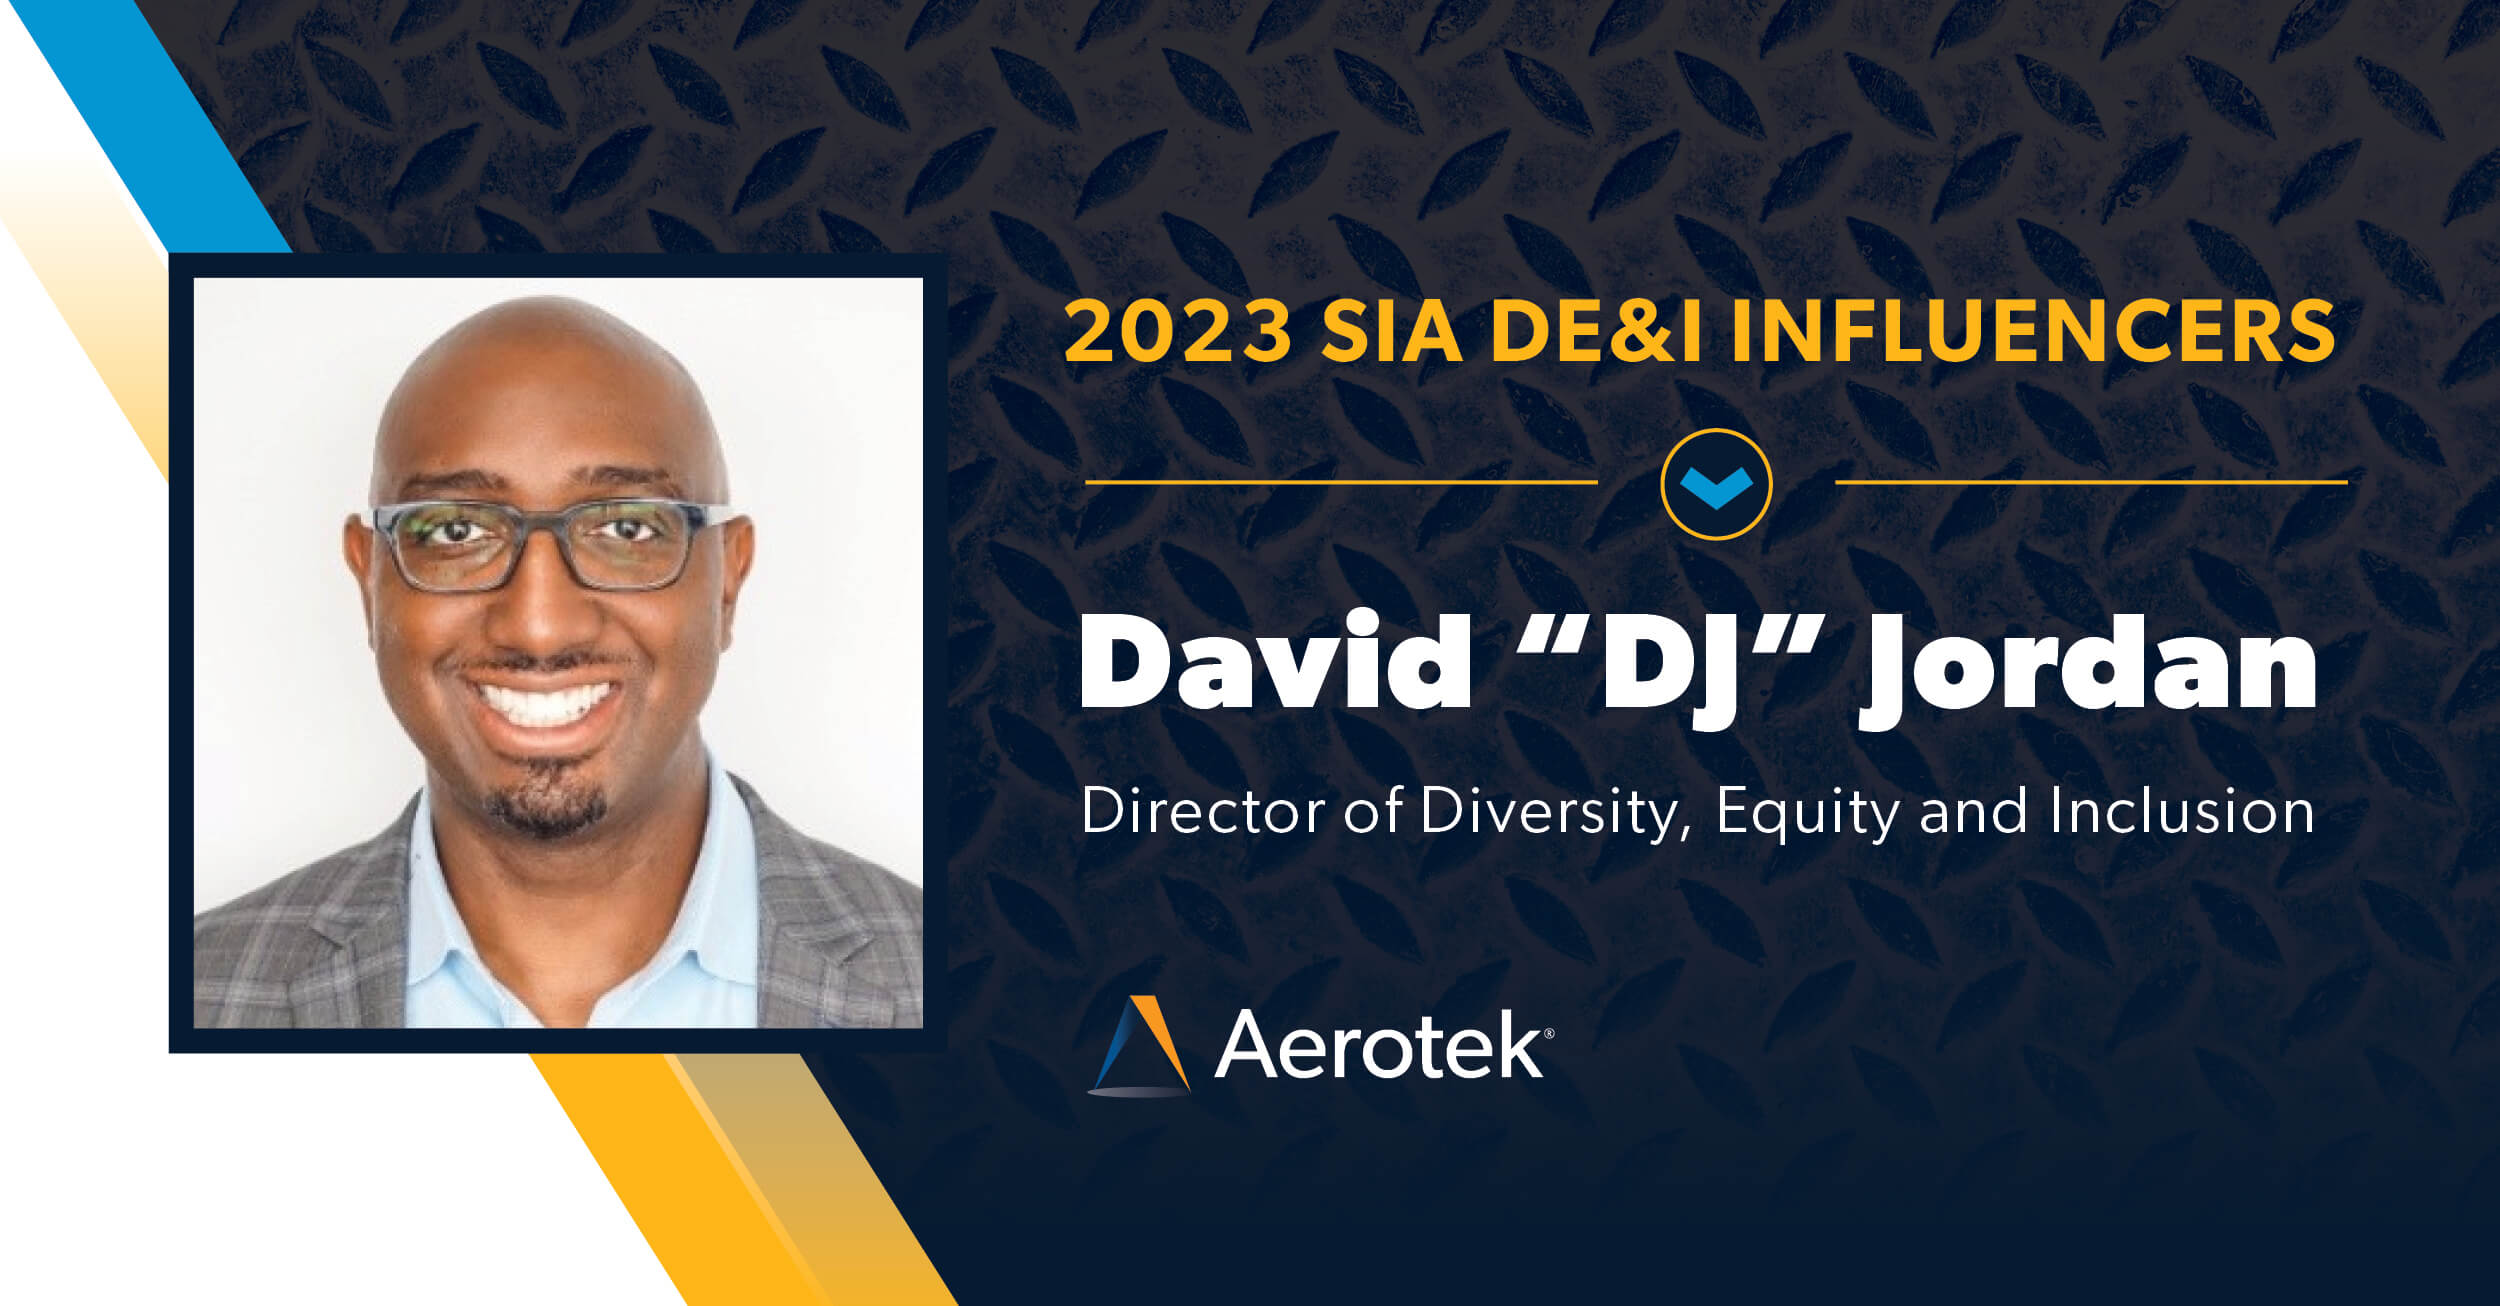 David Jordan was named a 2023 DEI Influencer by Staffing Industry Analysts